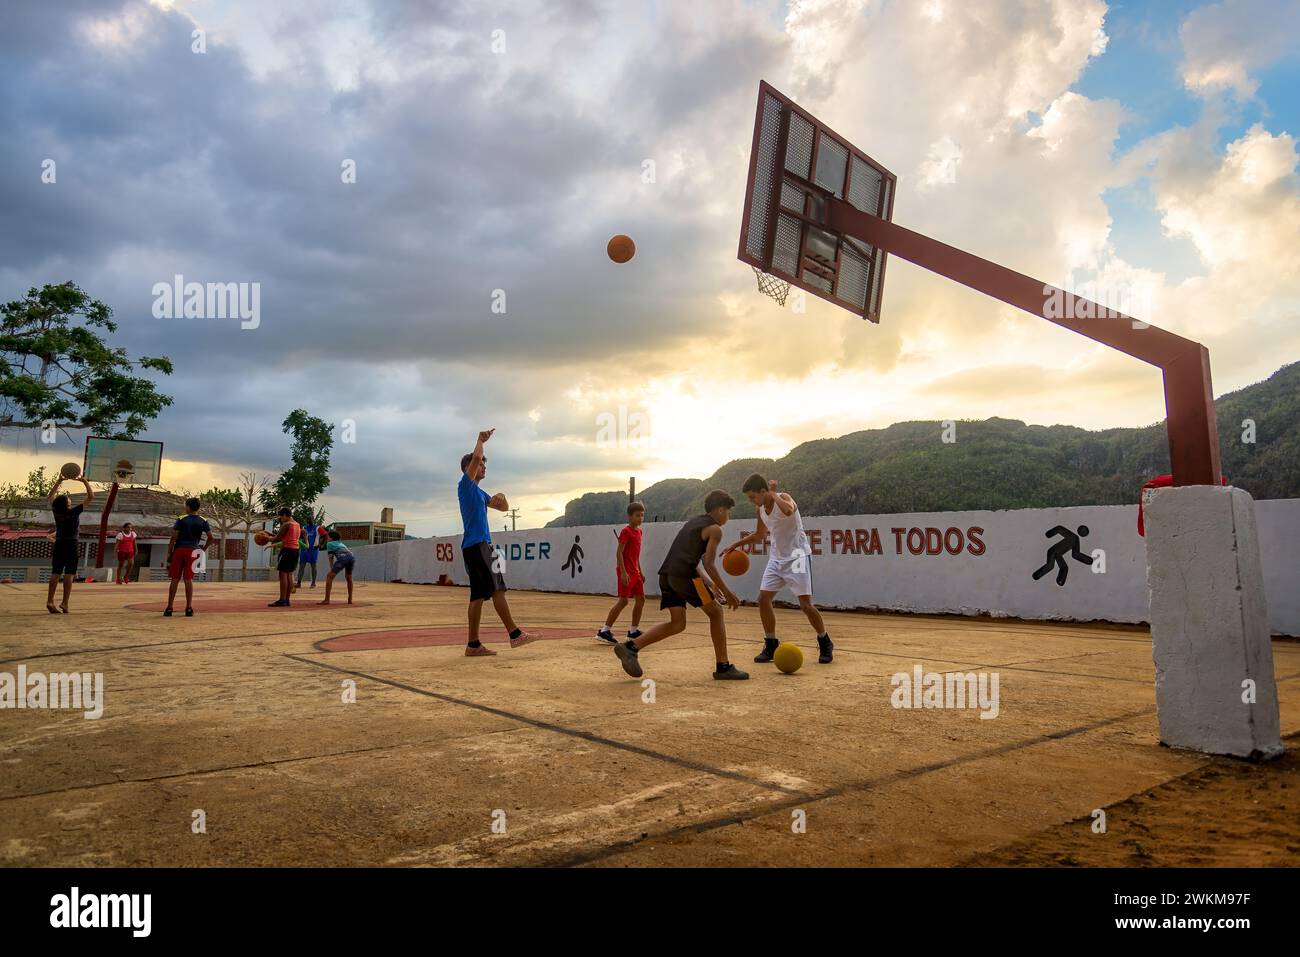 Vinales, Cuba - February 06, 2023: Local boys challenge in a dynamic outdoor Basketball Game at sunset. Mountains in the backdrop Stock Photo